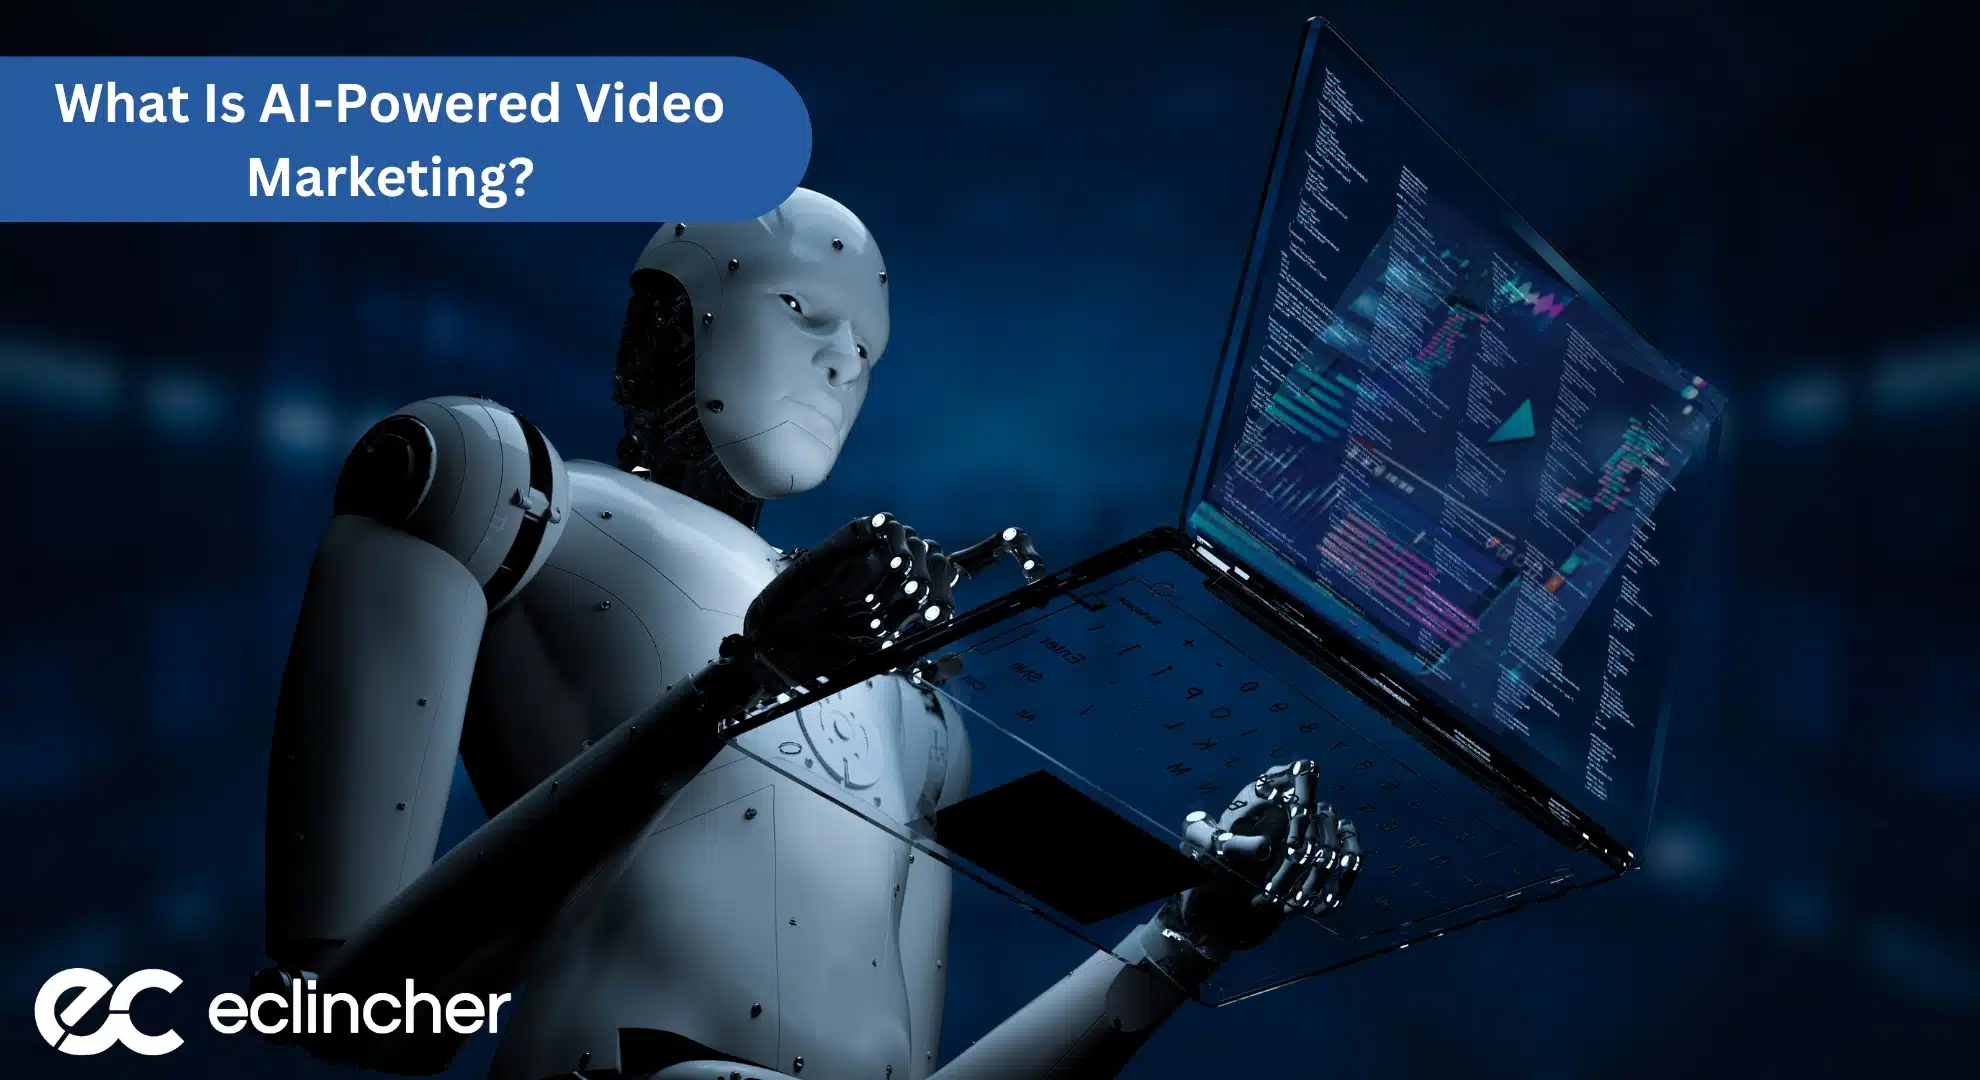 What Is AI-Powered Video Marketing